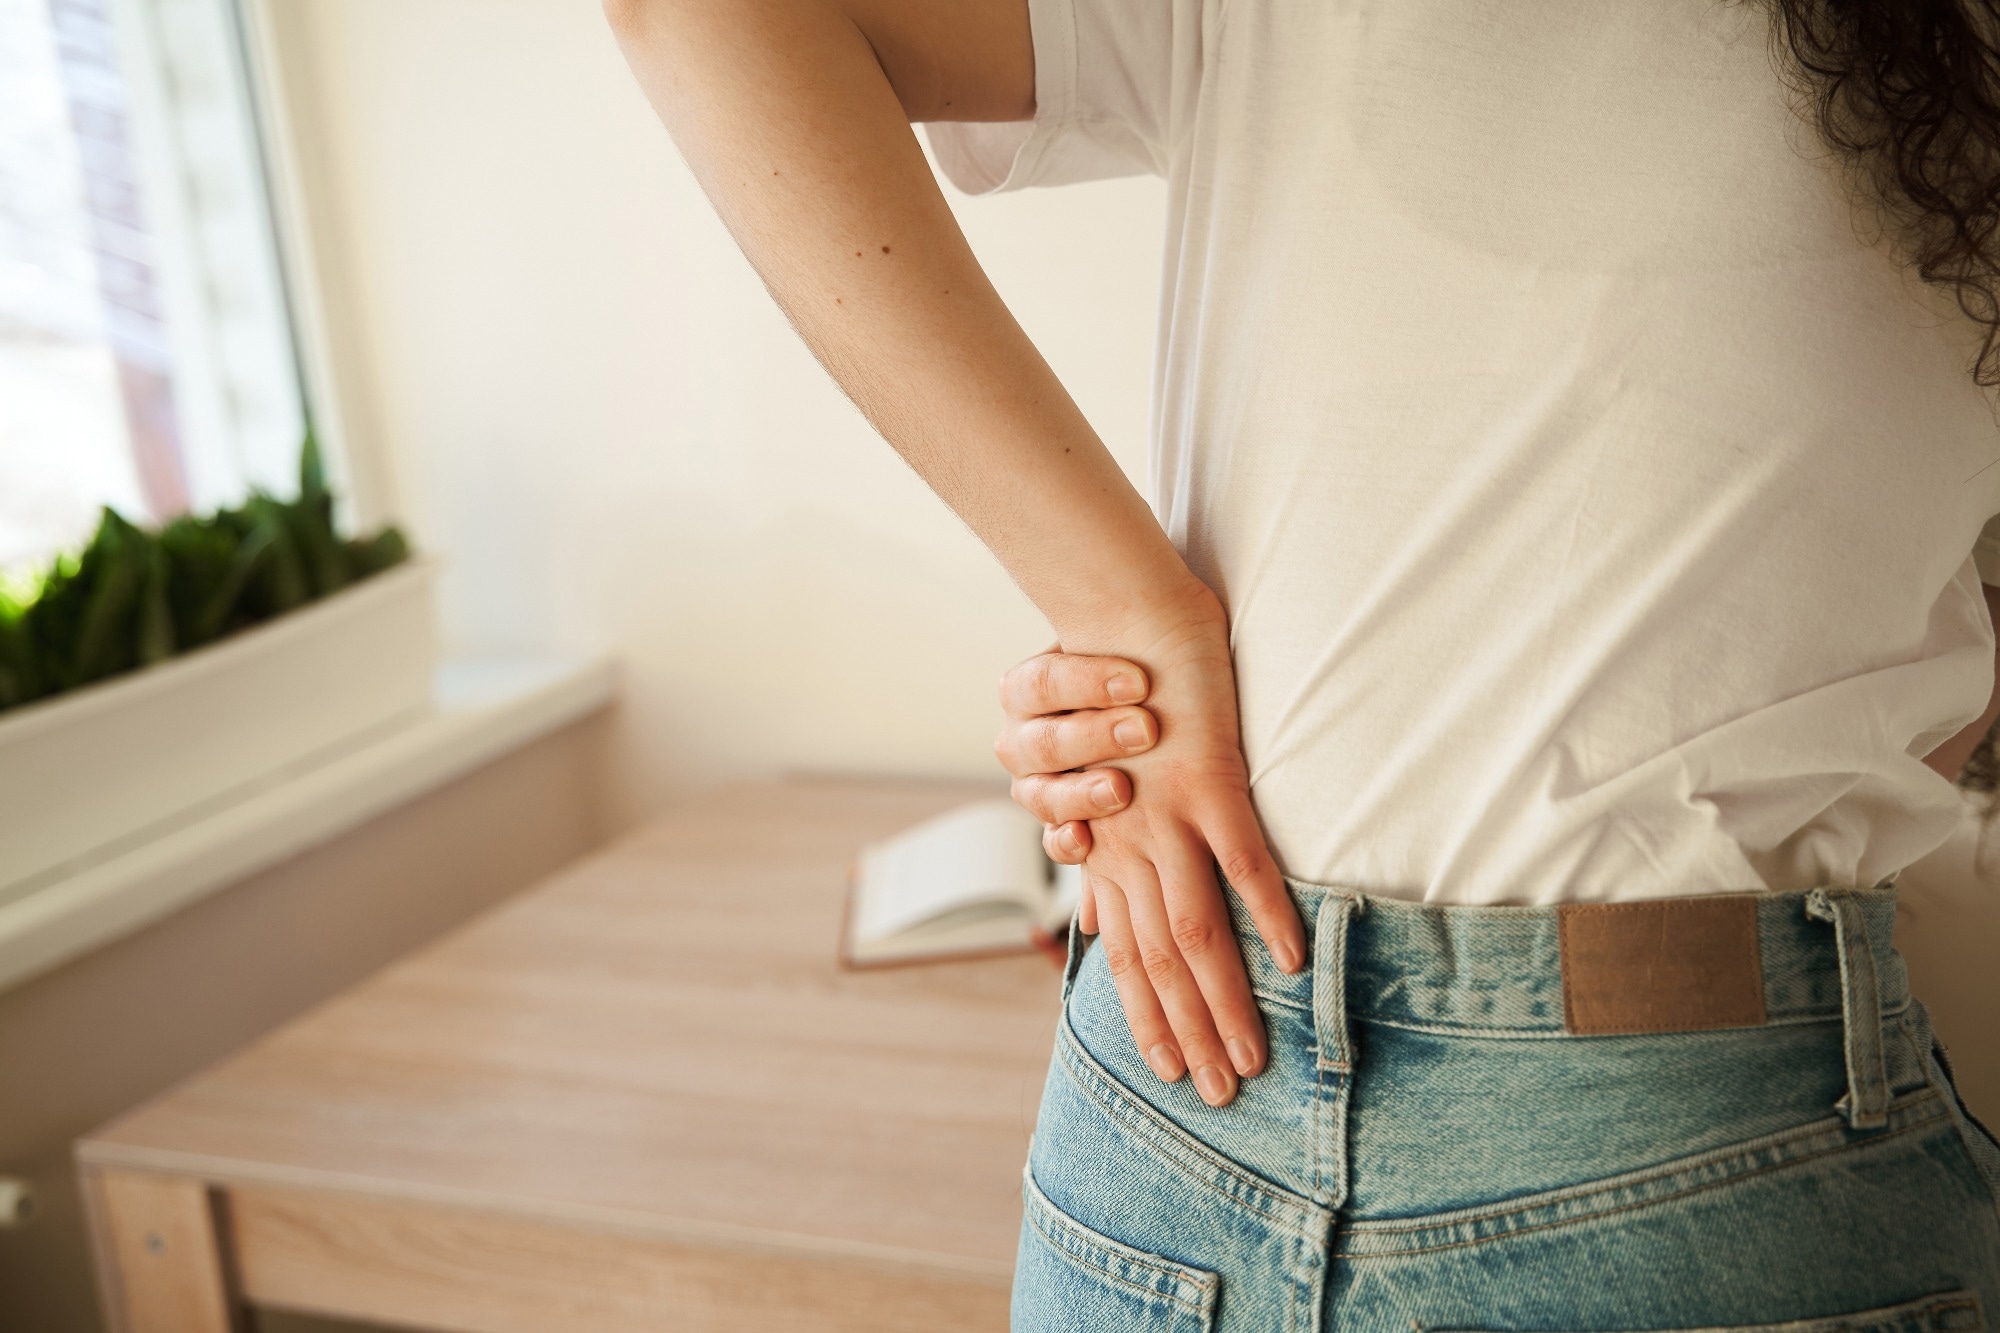 Study: Recurrent infections drive persistent bladder dysfunction and pain via sensory nerve sprouting and mast cell activity. Image Credit: Rabizo Anatolii/Shutterstock.com